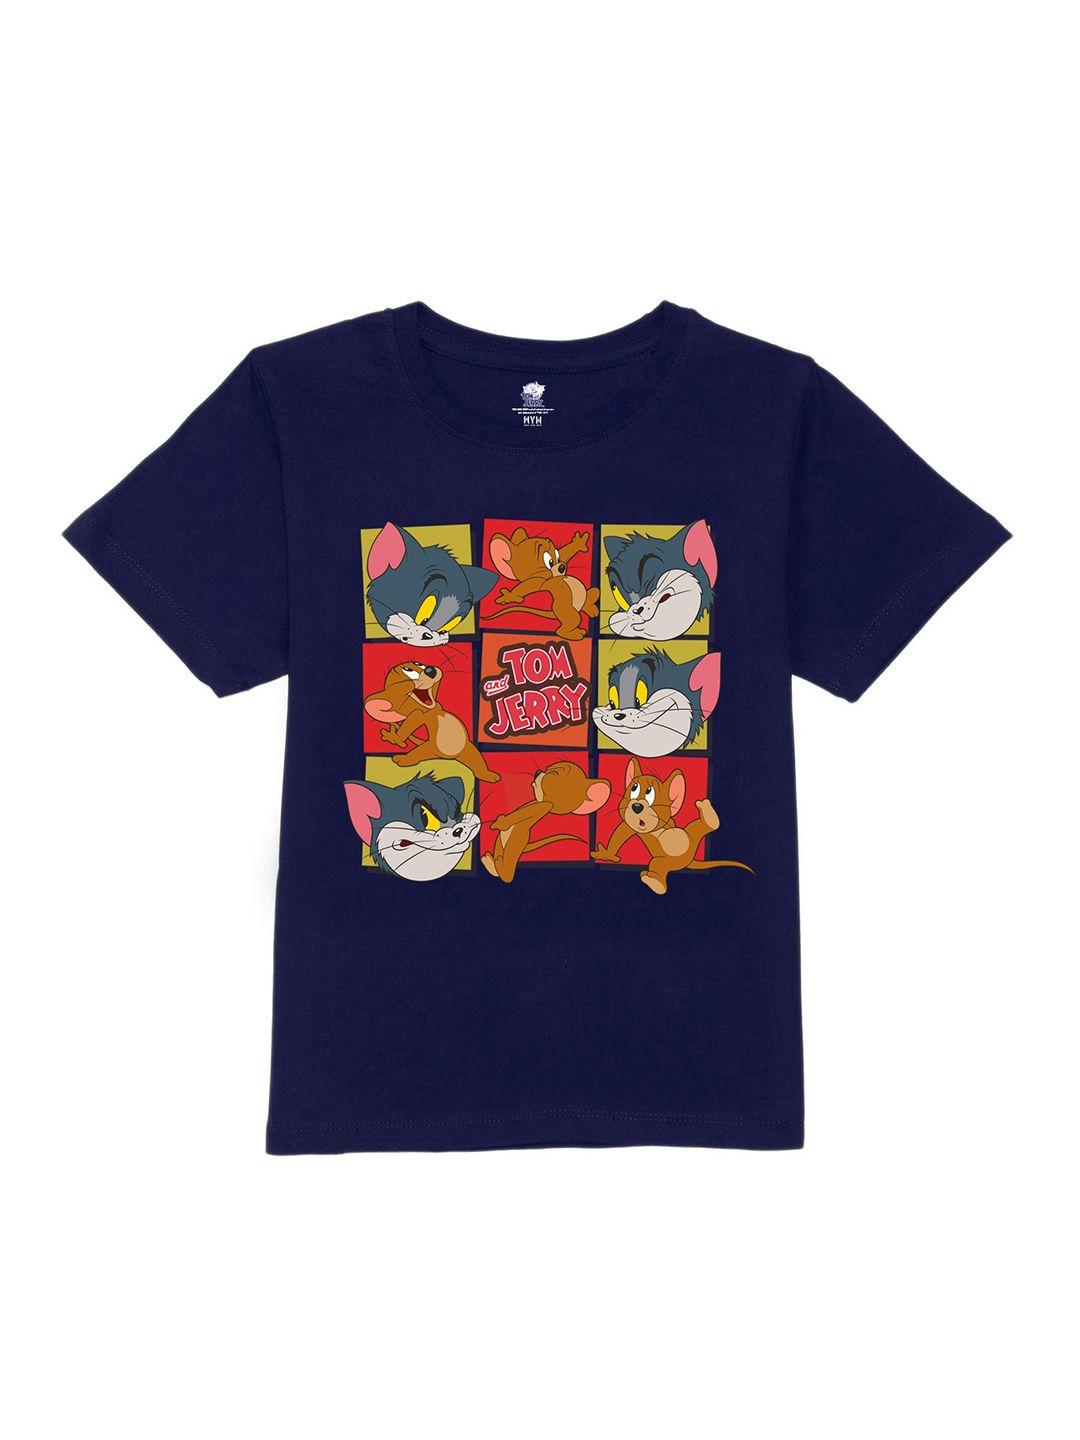 wear-your-mind-boys-blue-printed-t-shirt